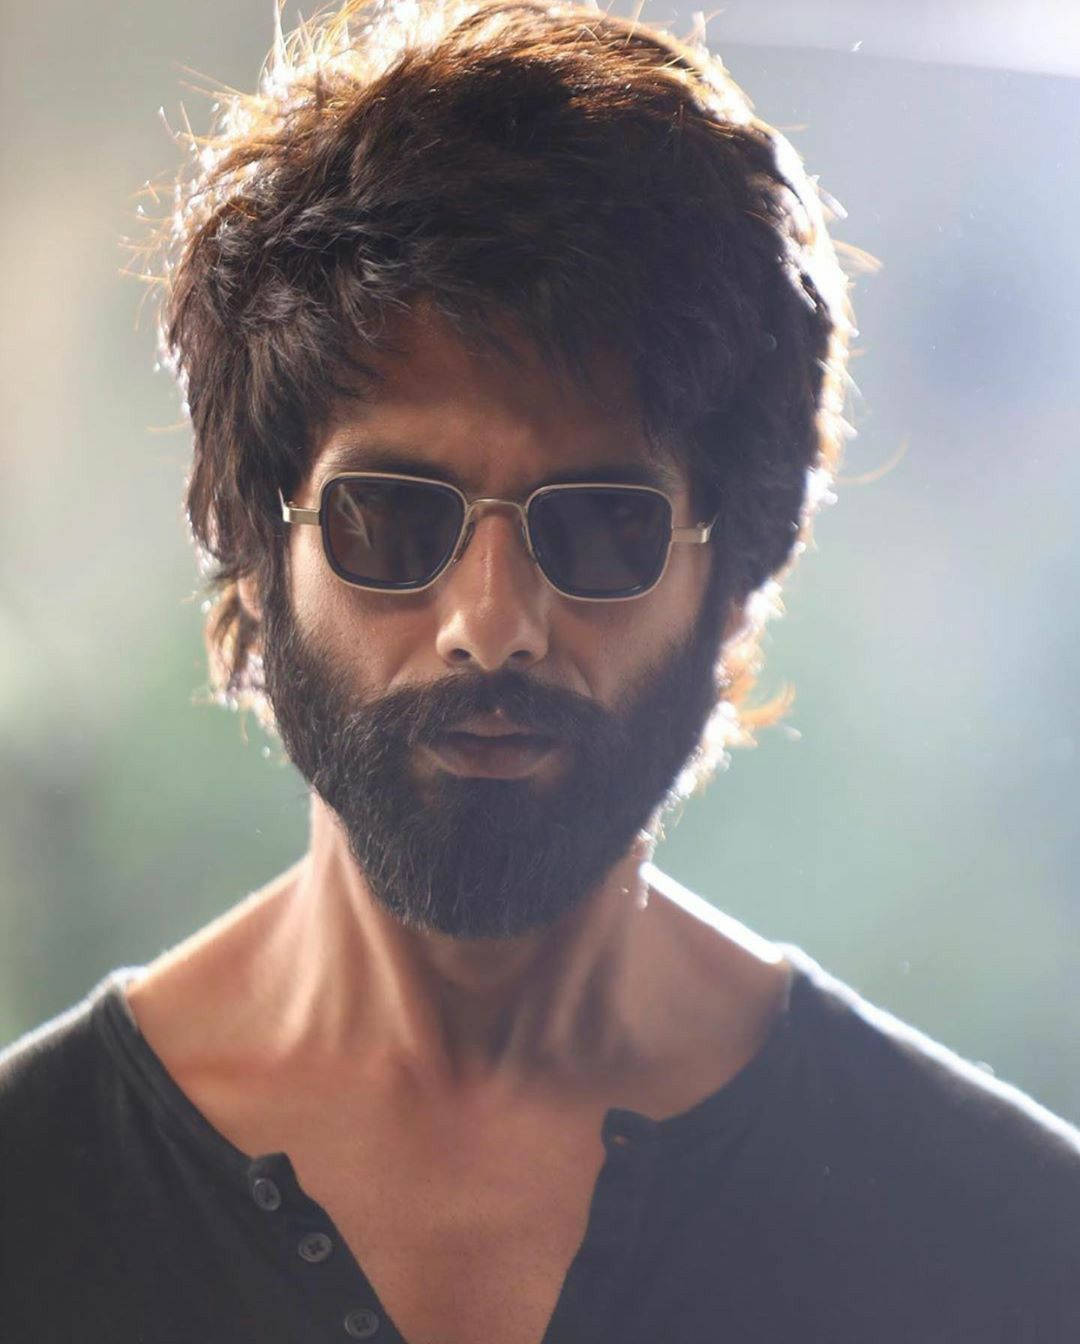 Shahid Kapoor Flaunting His Style With Shades Wallpaper